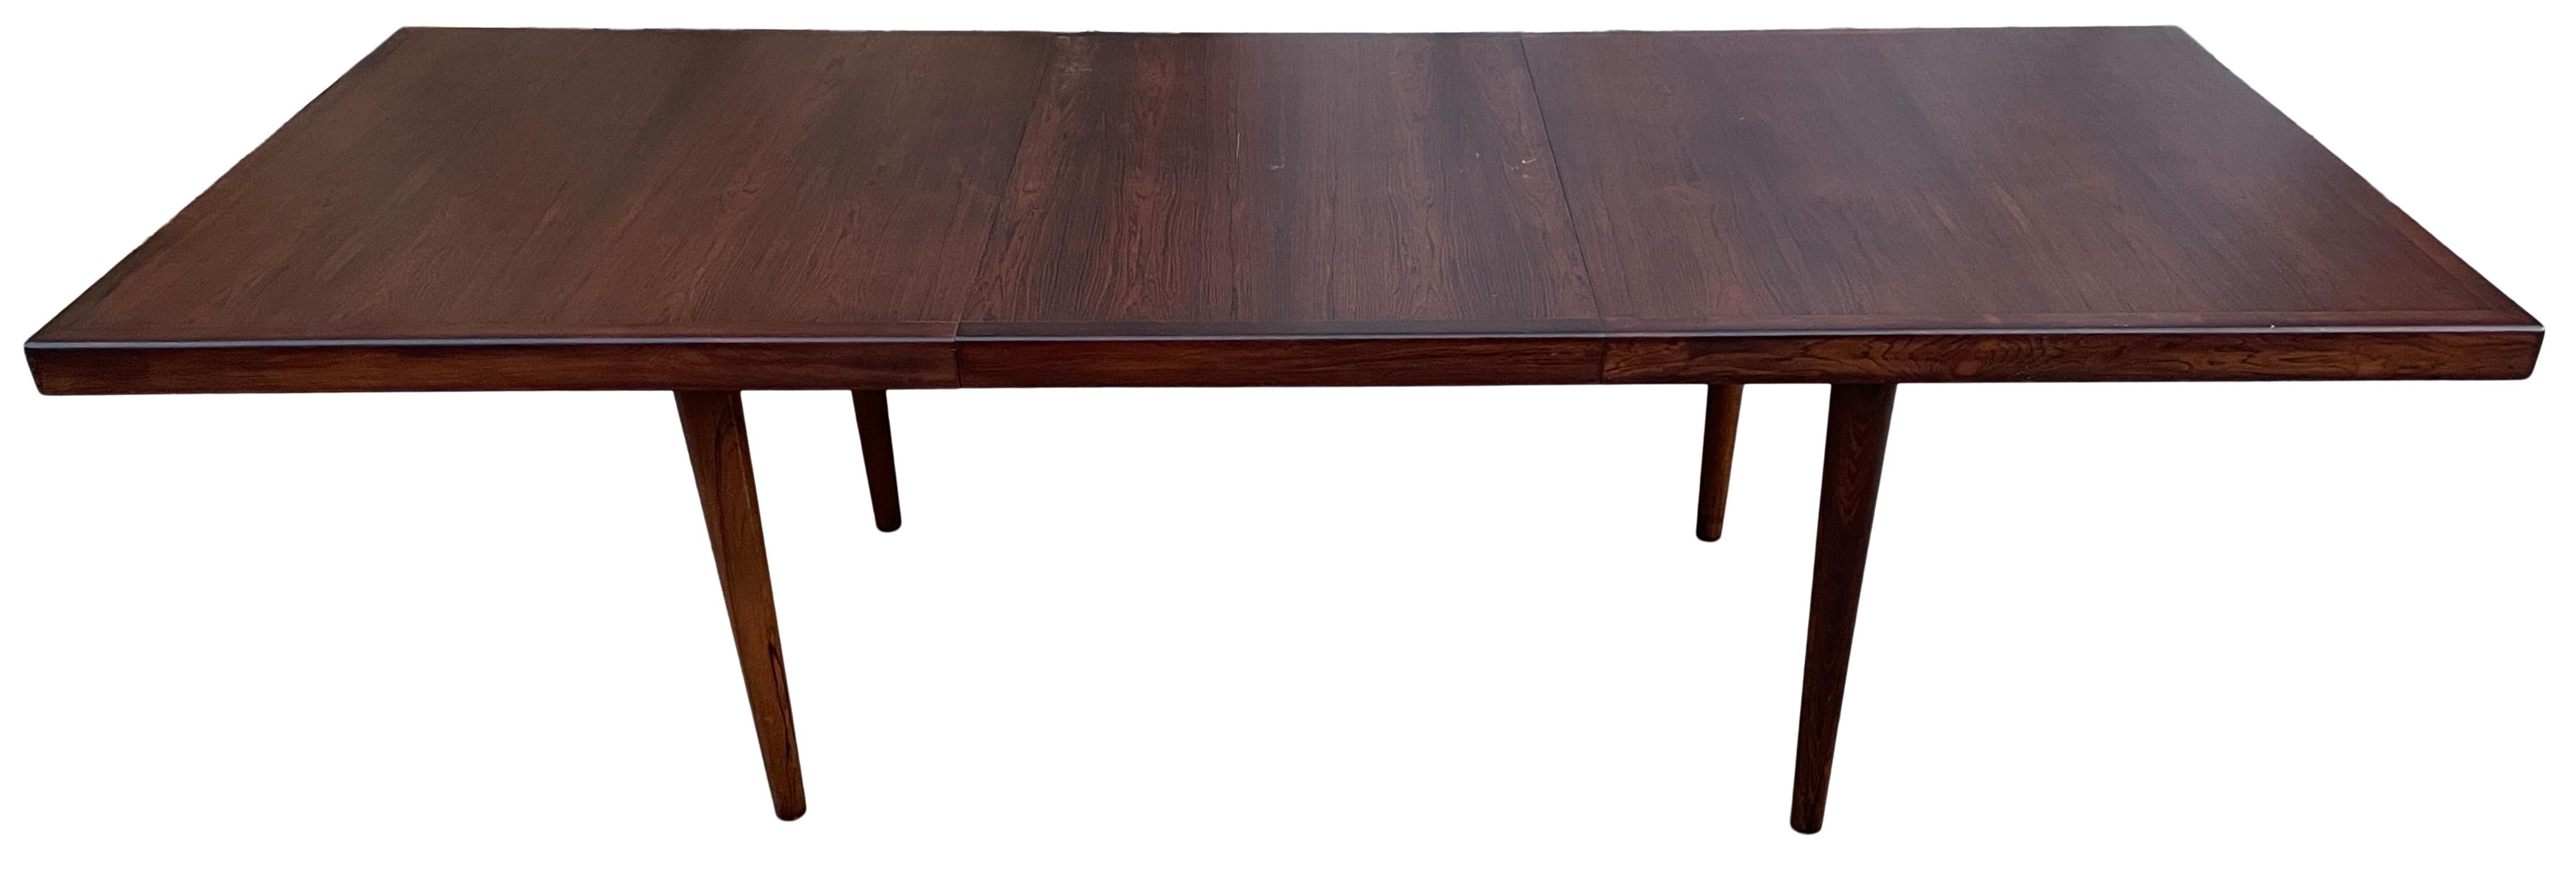 Midcentury Rare Solid minimalist Rosewood Expandable Dining Table with 1 Leaf For Sale 1